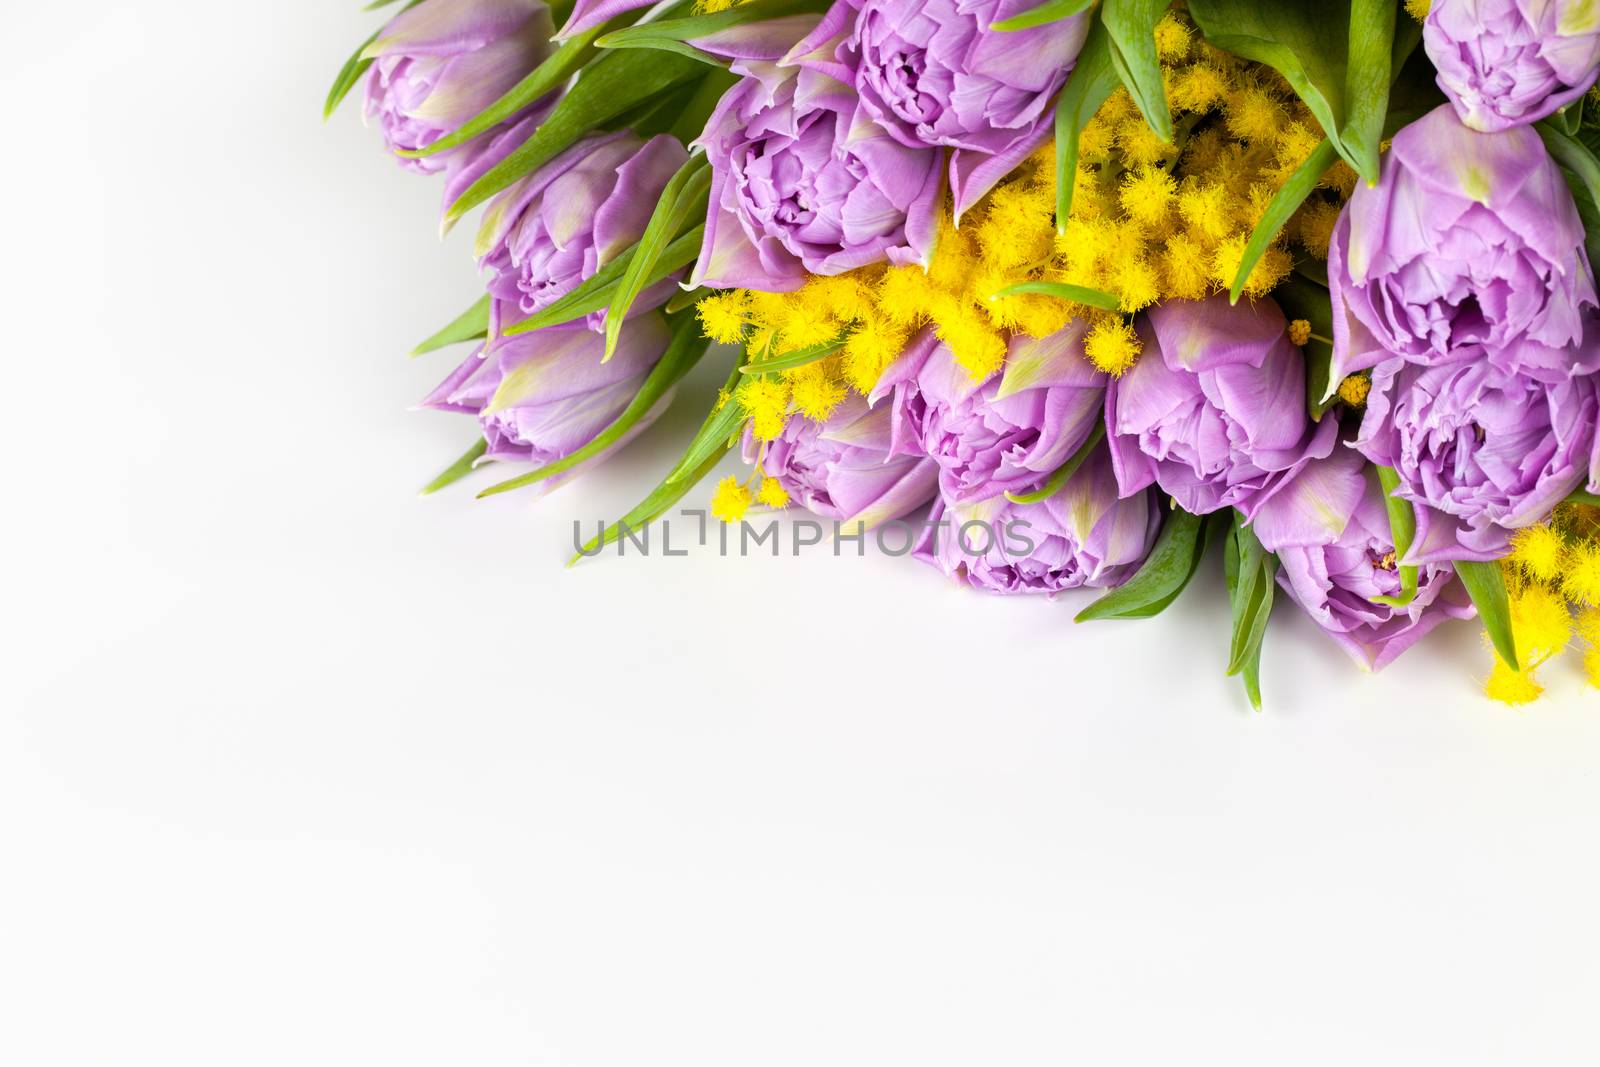 Bouquet of lilac tulips and yellow mimosas on white background, copy space, side view, closeup. March 8, February 14, birthday, Valentine's, Mother's, Women's day celebration, spring concept.